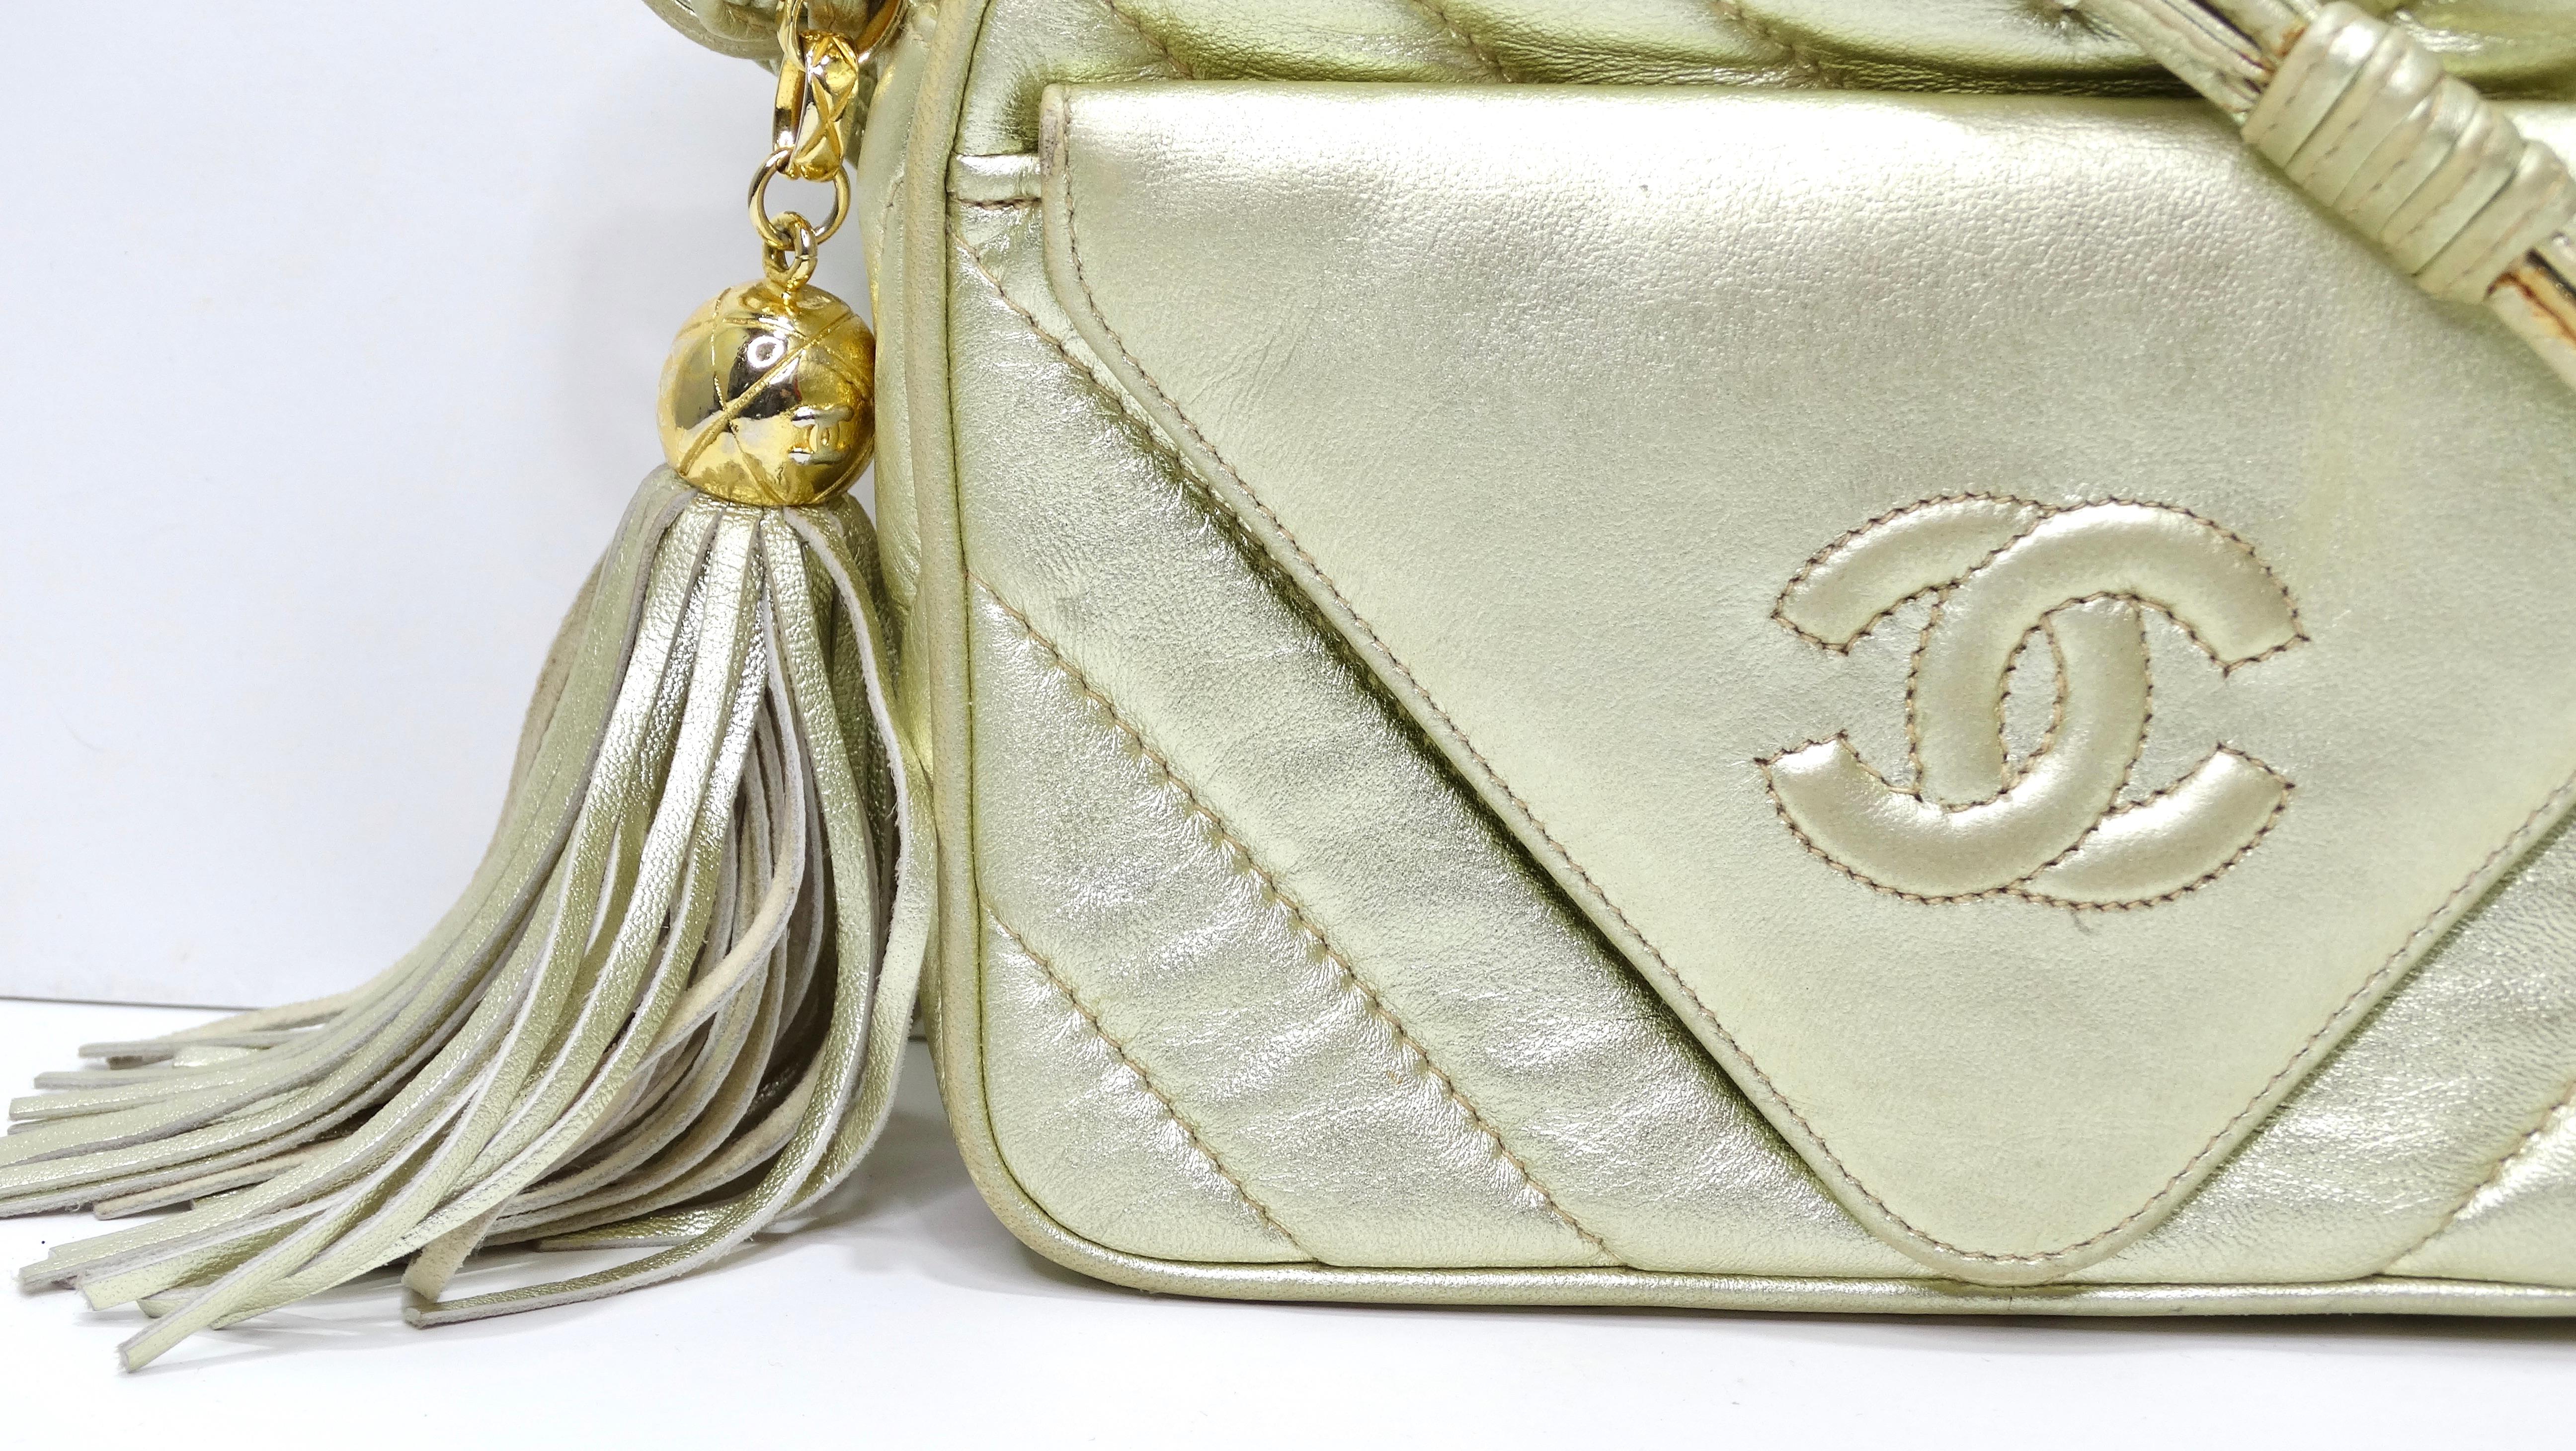 This is the most amazing and luxurious handbag from the House of Chanel! Don't miss out on the chance to have a piece of Chanel history with this gem from the 1980's. Everything is better vintage! The condition of this bag proves this. This is in